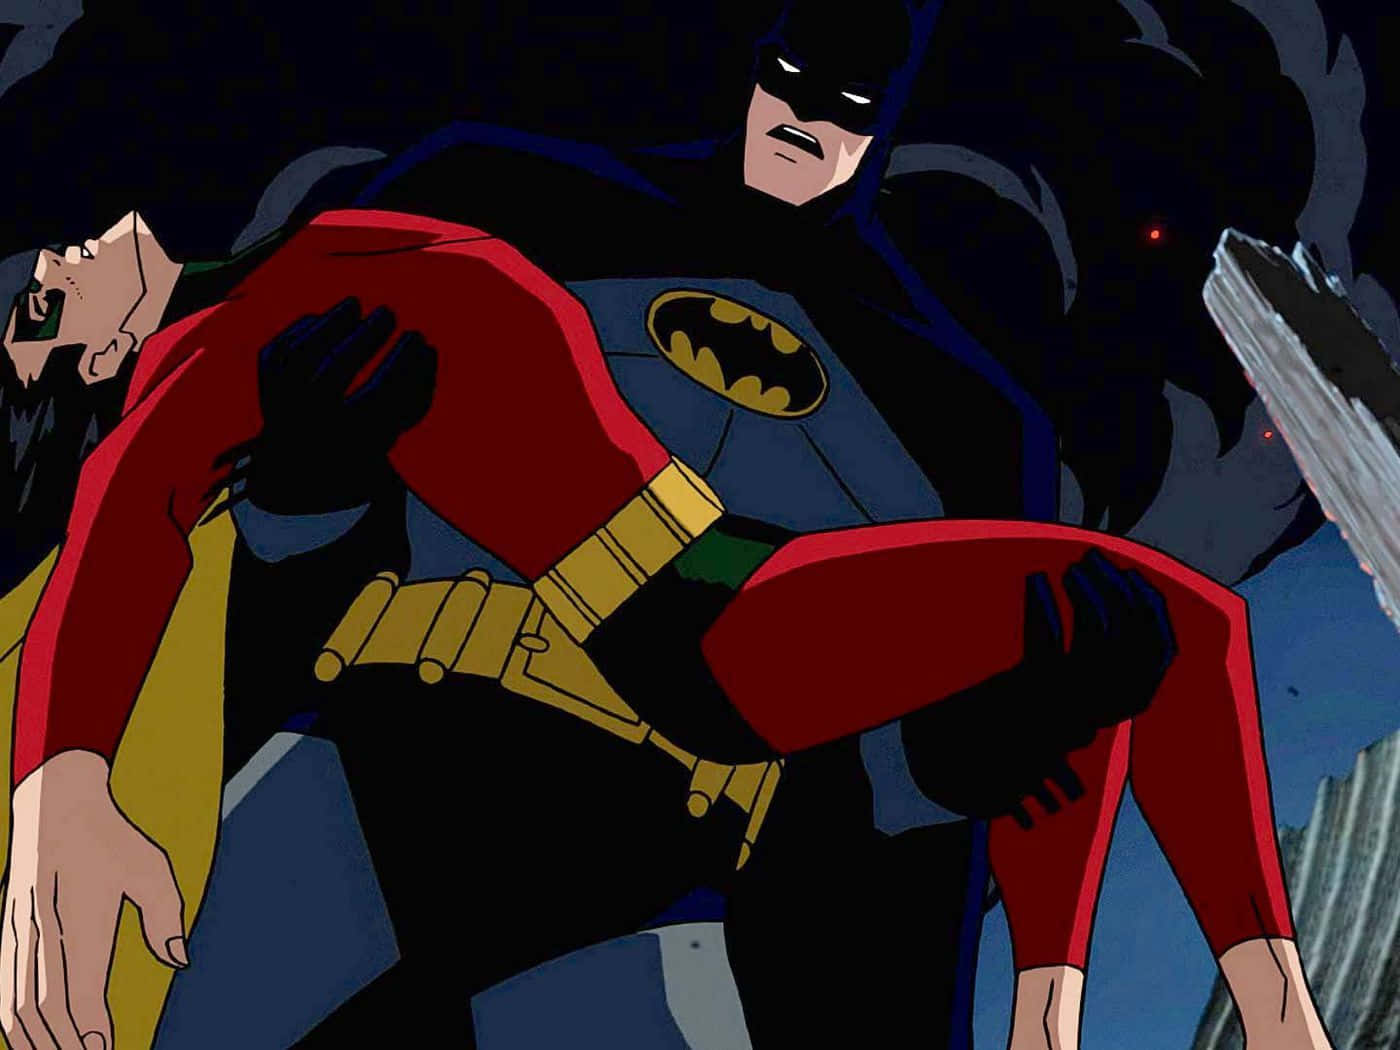 Batman and Robin in a pivotal moment from "Death in the Family" Wallpaper